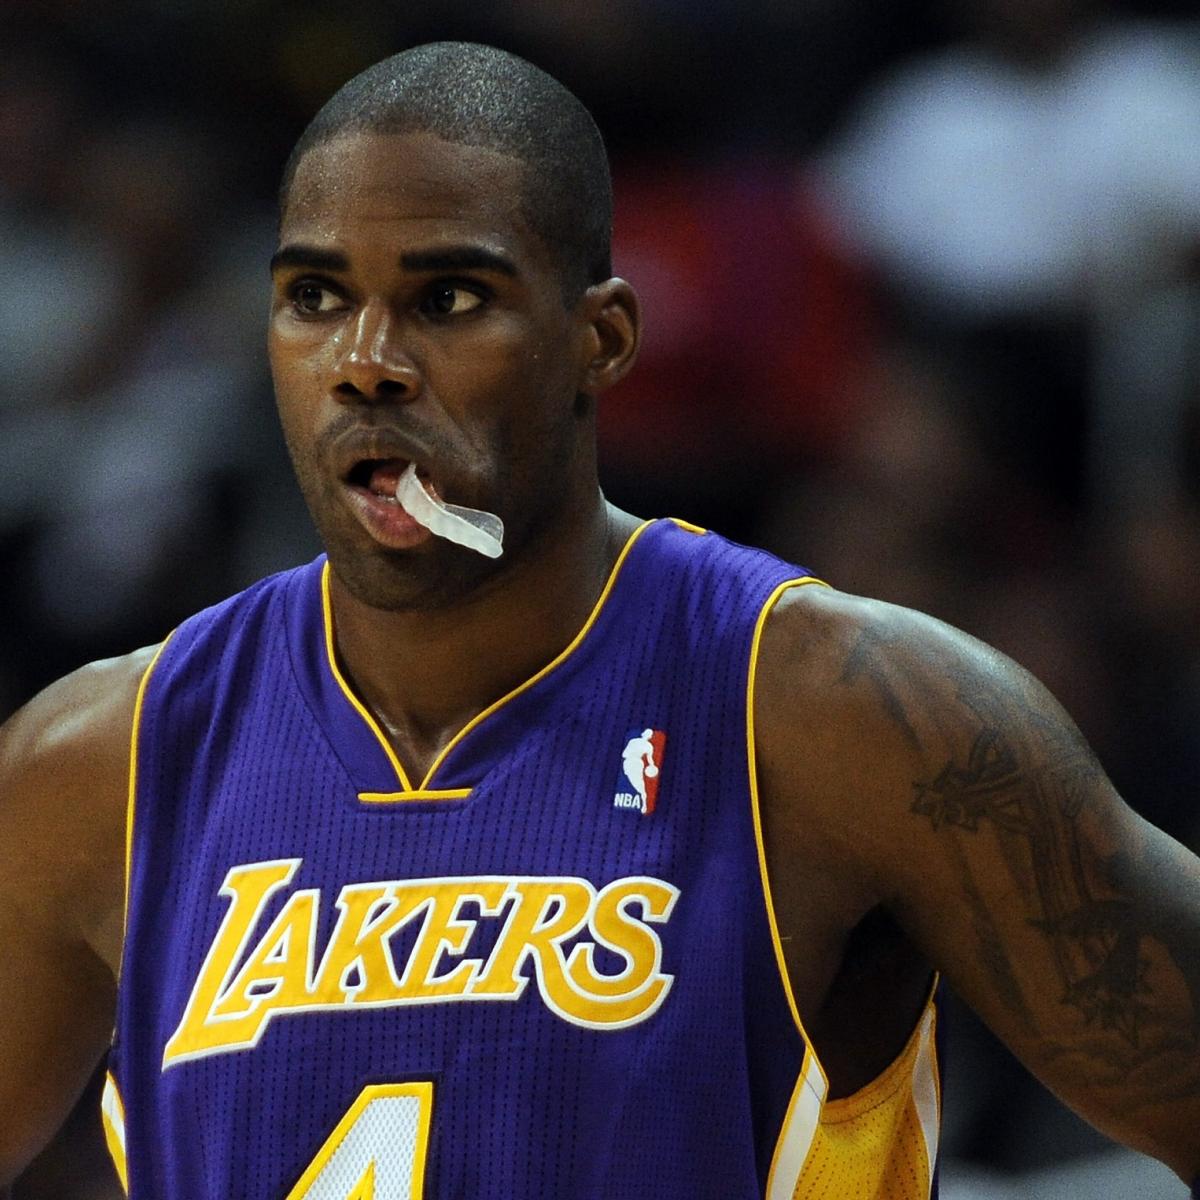 Antawn Jamison posted 33 points as the Lakers crushed the Nuggets in  California, Basketball News